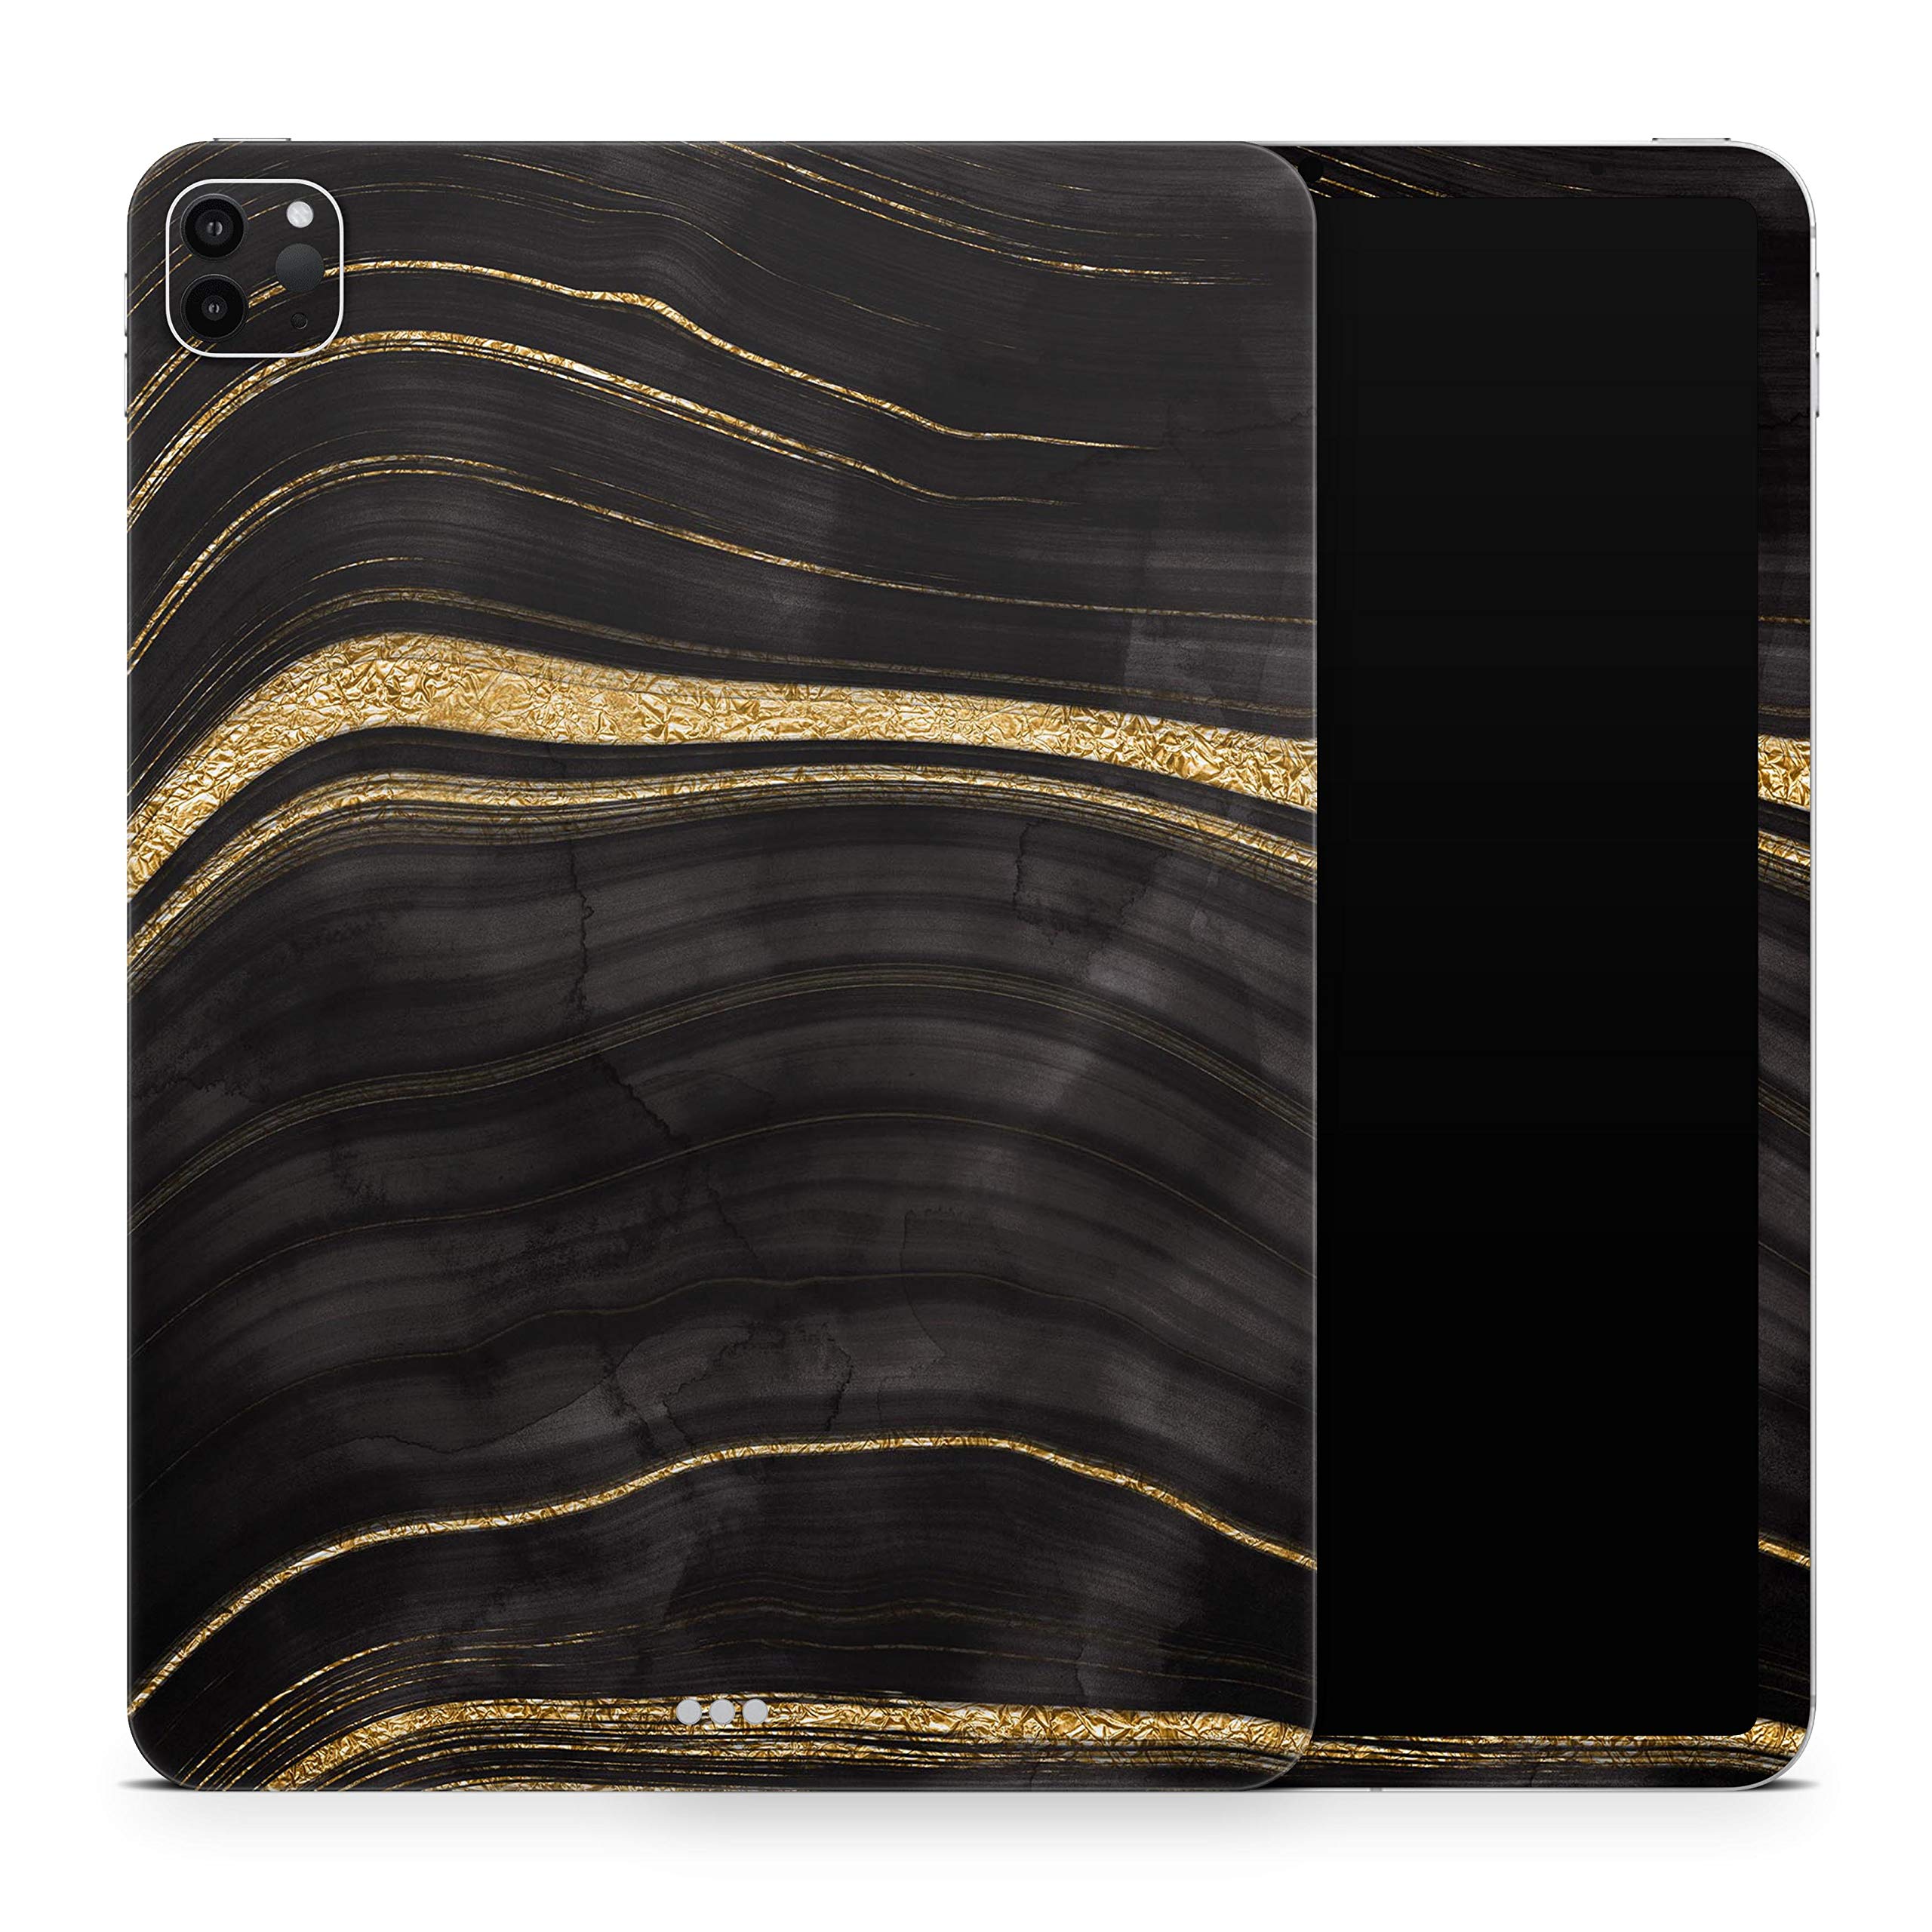 Design Skinz Vivid Agate Vein Slice Foiled V9 Full-Body Wrap Decal Protective Skin-Kit Compatible with Apple iPad 2 (A1395/A1396/A1397)